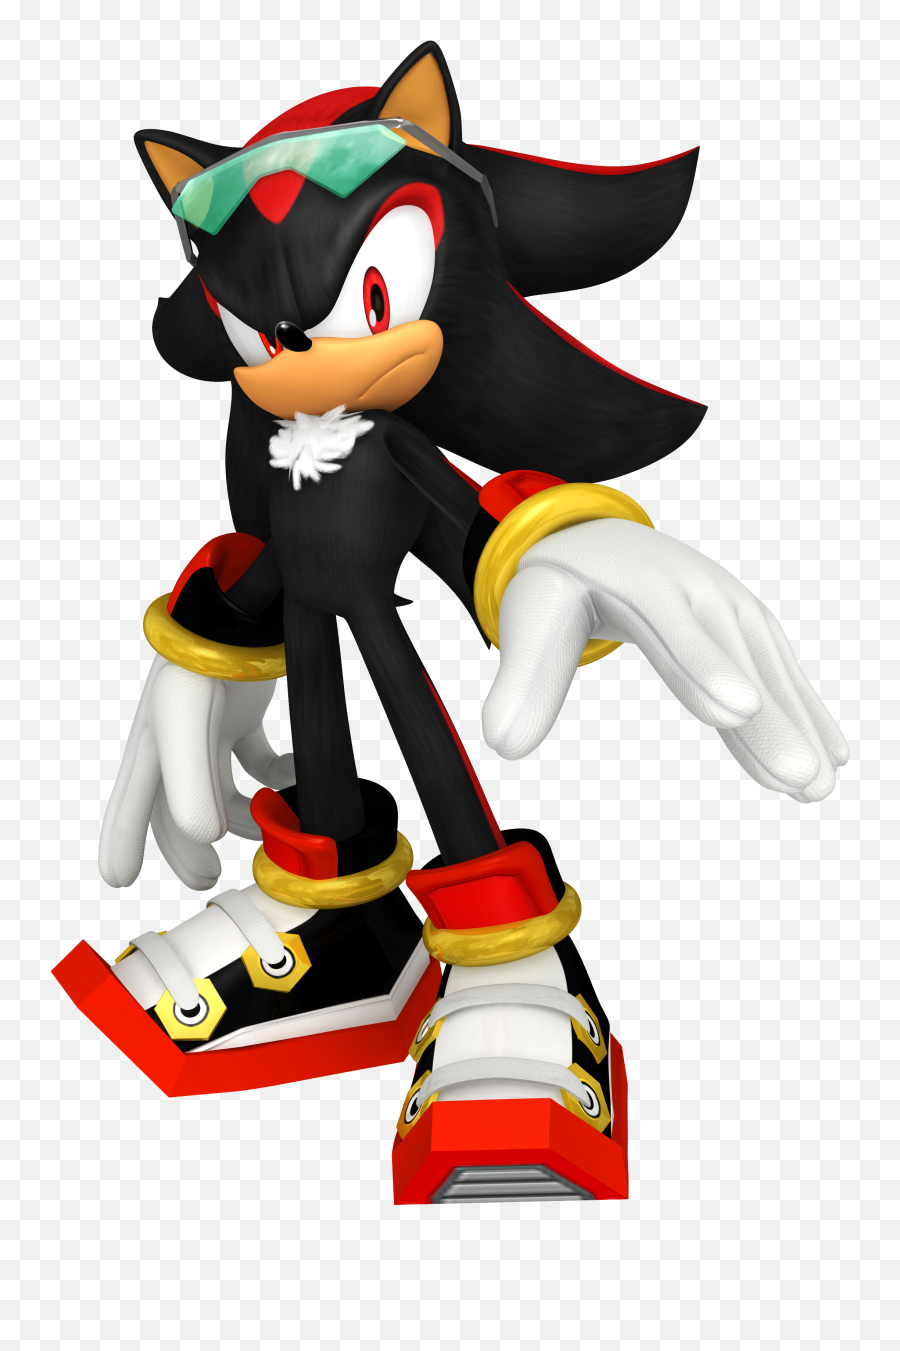 Download Sonic Free Riders Shadow - Shadow The Hedgehog Rider Emoji,Shadow The Hedgehog Logo